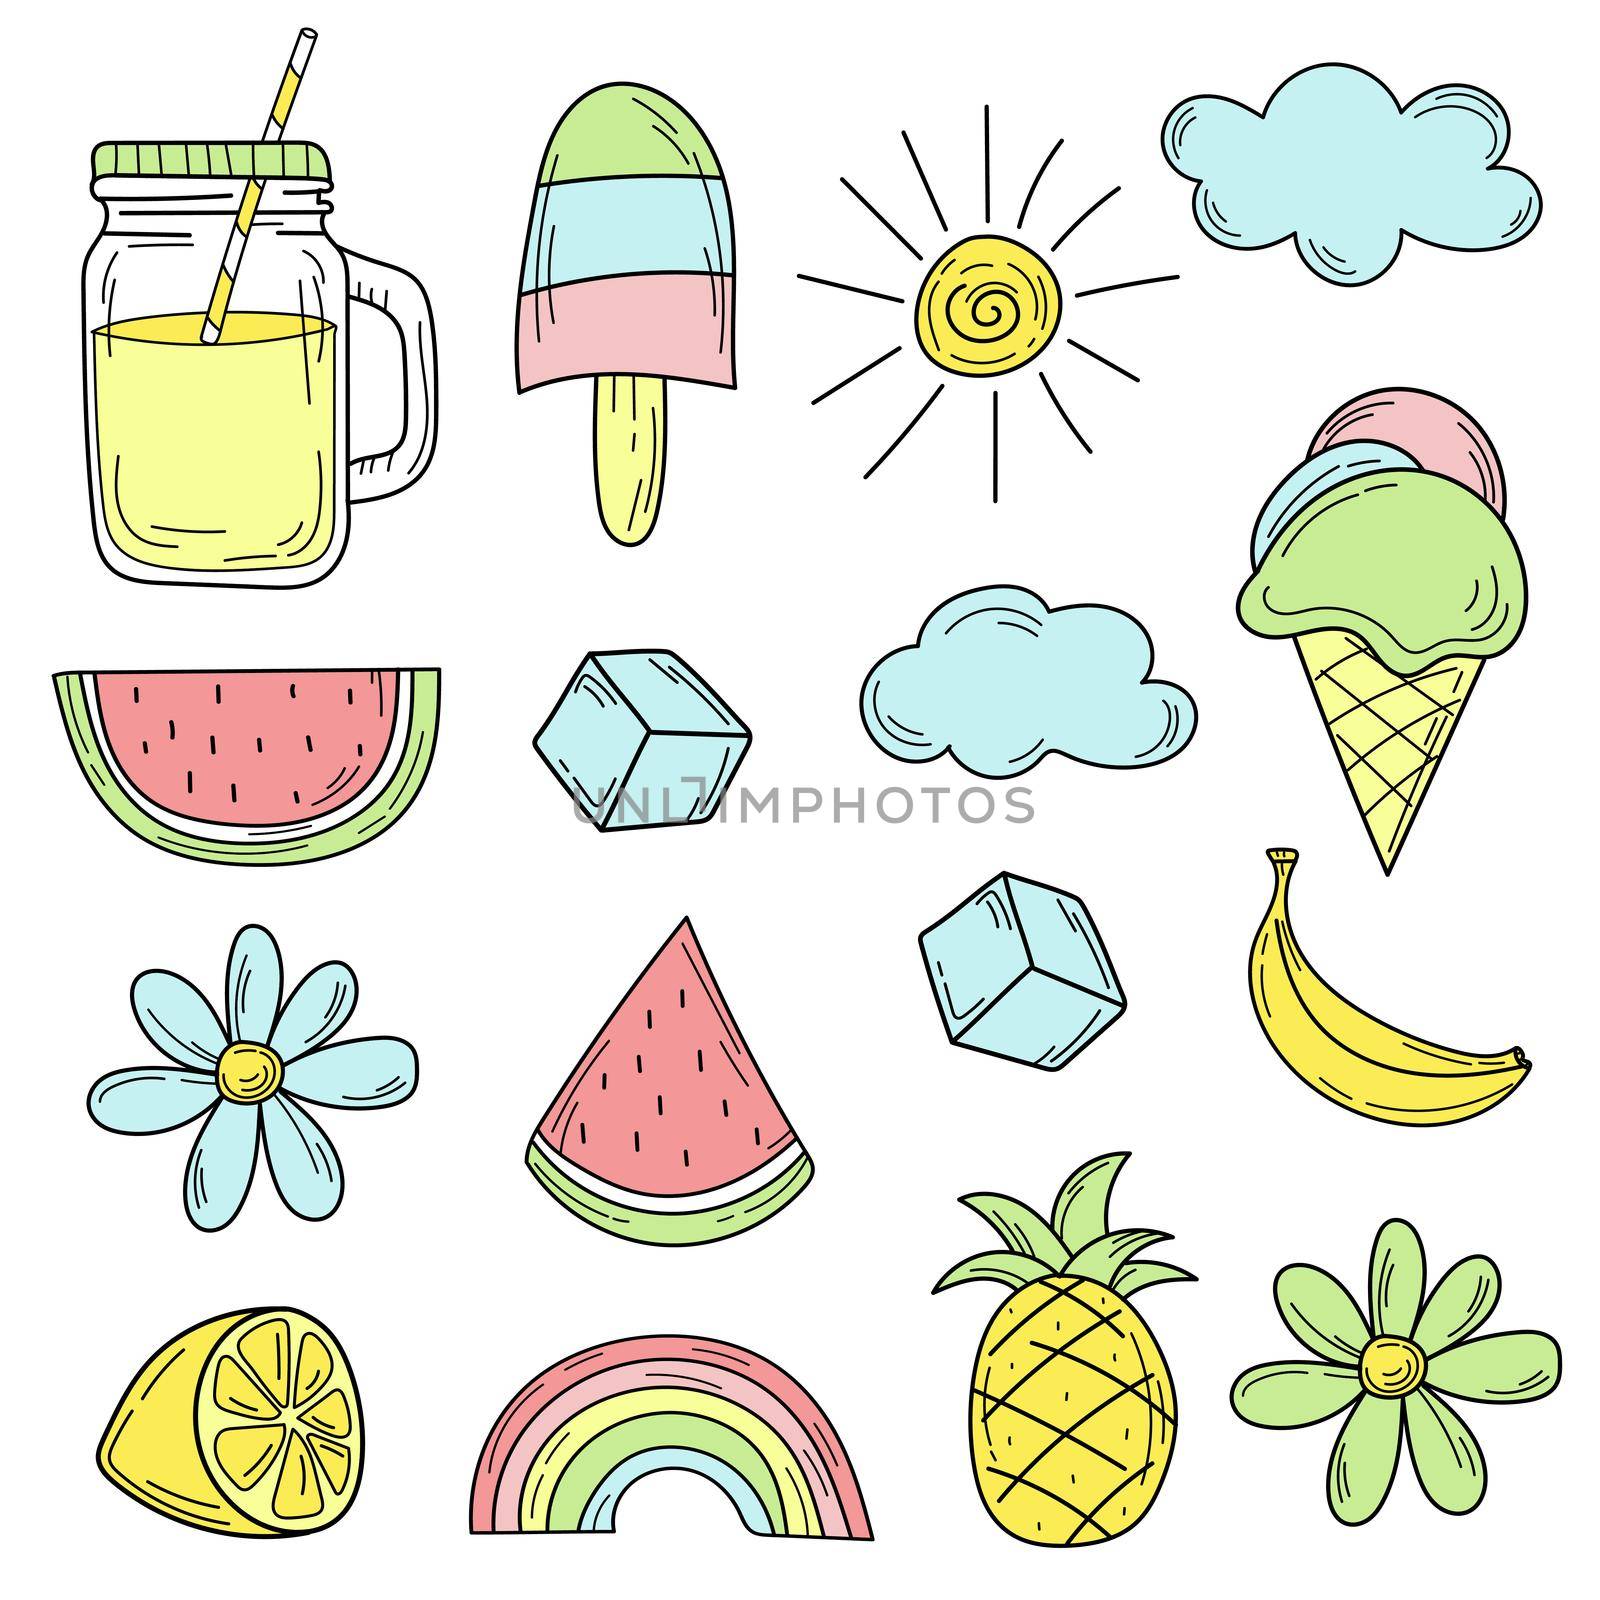 Cute colorful summer icons. Hand drawn set of summer elements for design. Lemonade, fruits, sun, flowers.